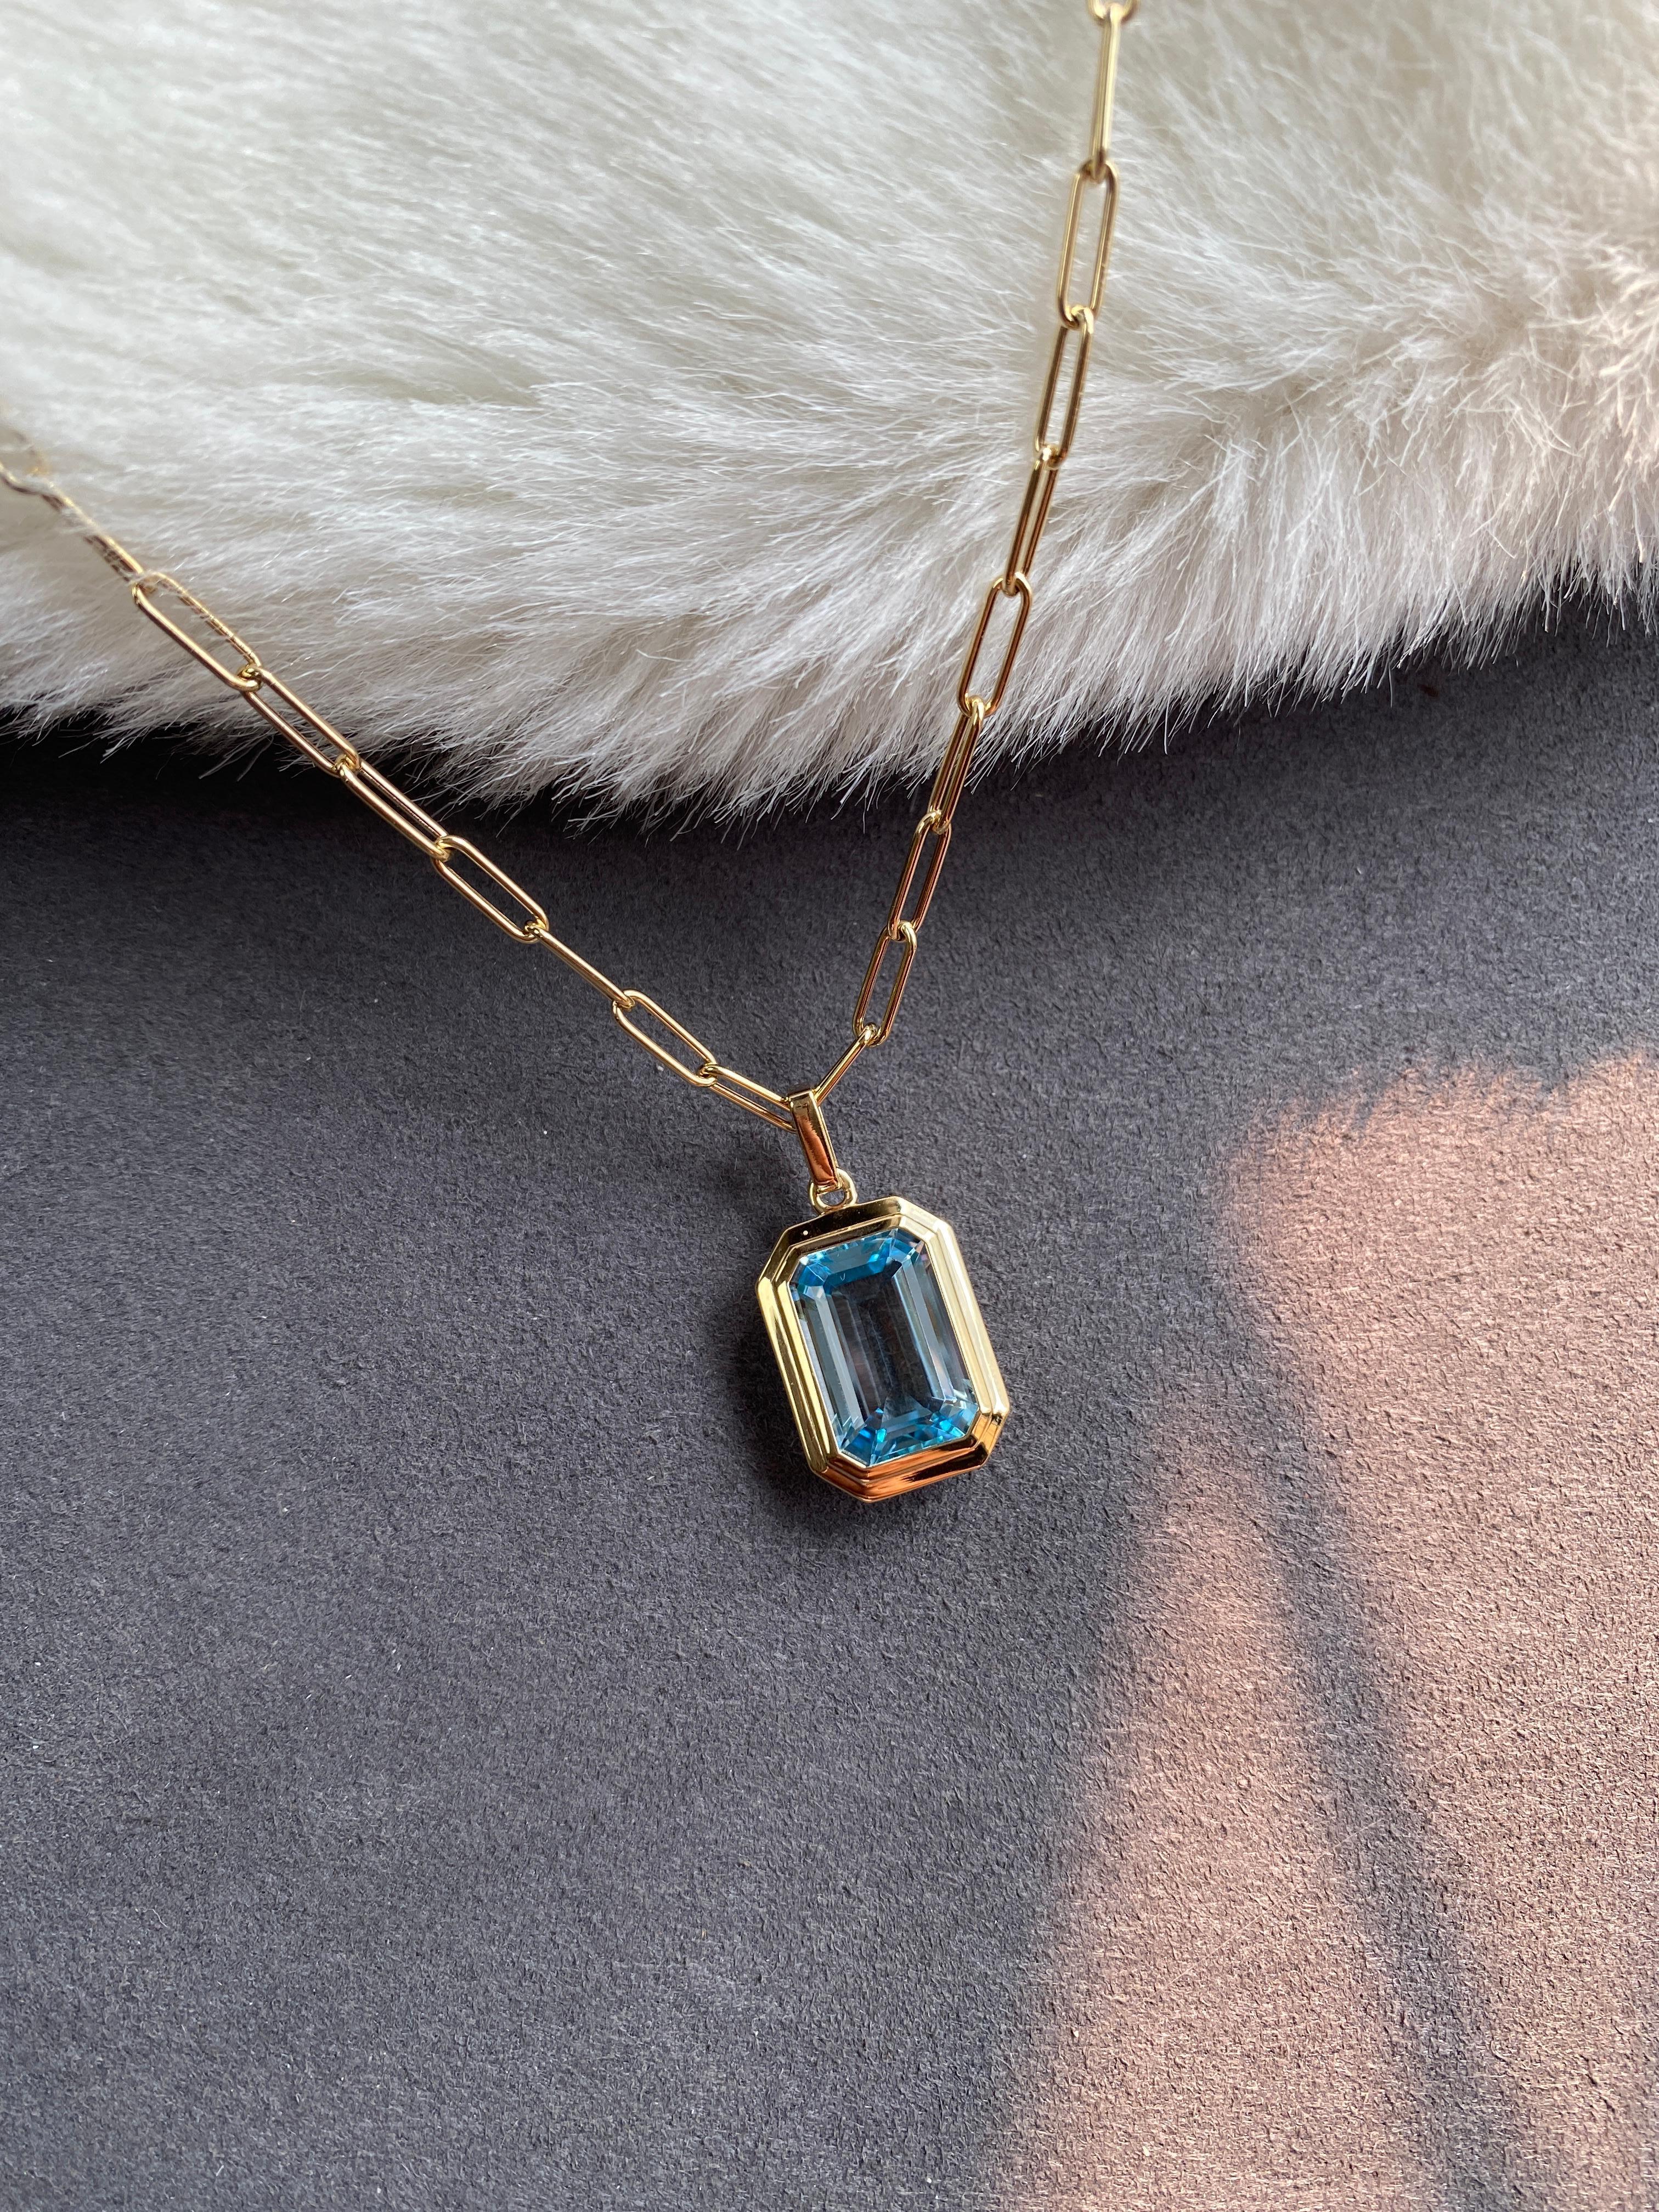 Goshwara Blue Topaz Emerald Cut Bezel Set Pendant In New Condition For Sale In New York, NY